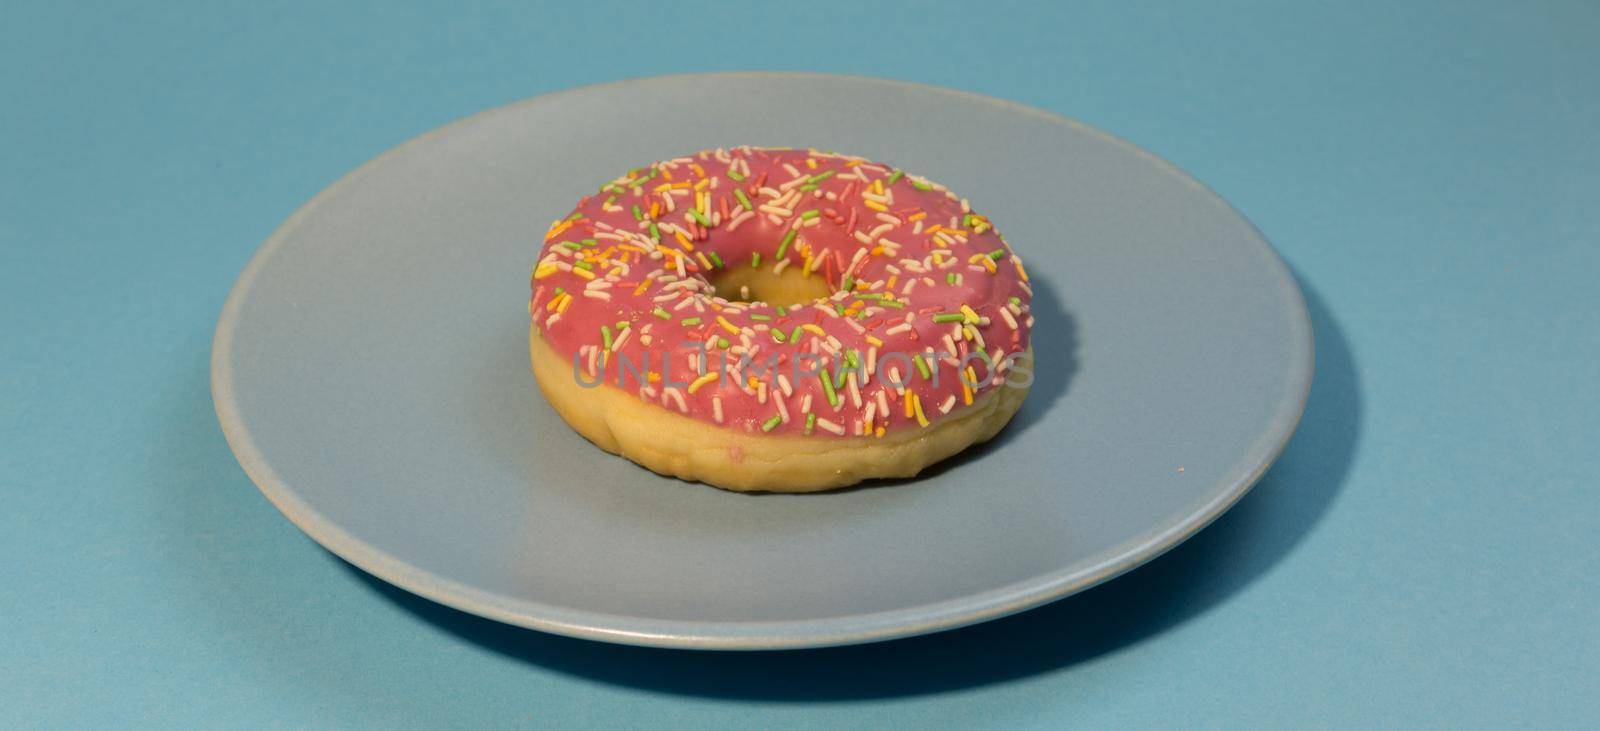 Pink sweet doughnut or donut with colored sprinkles on a blue background. Bitten off American bagel.